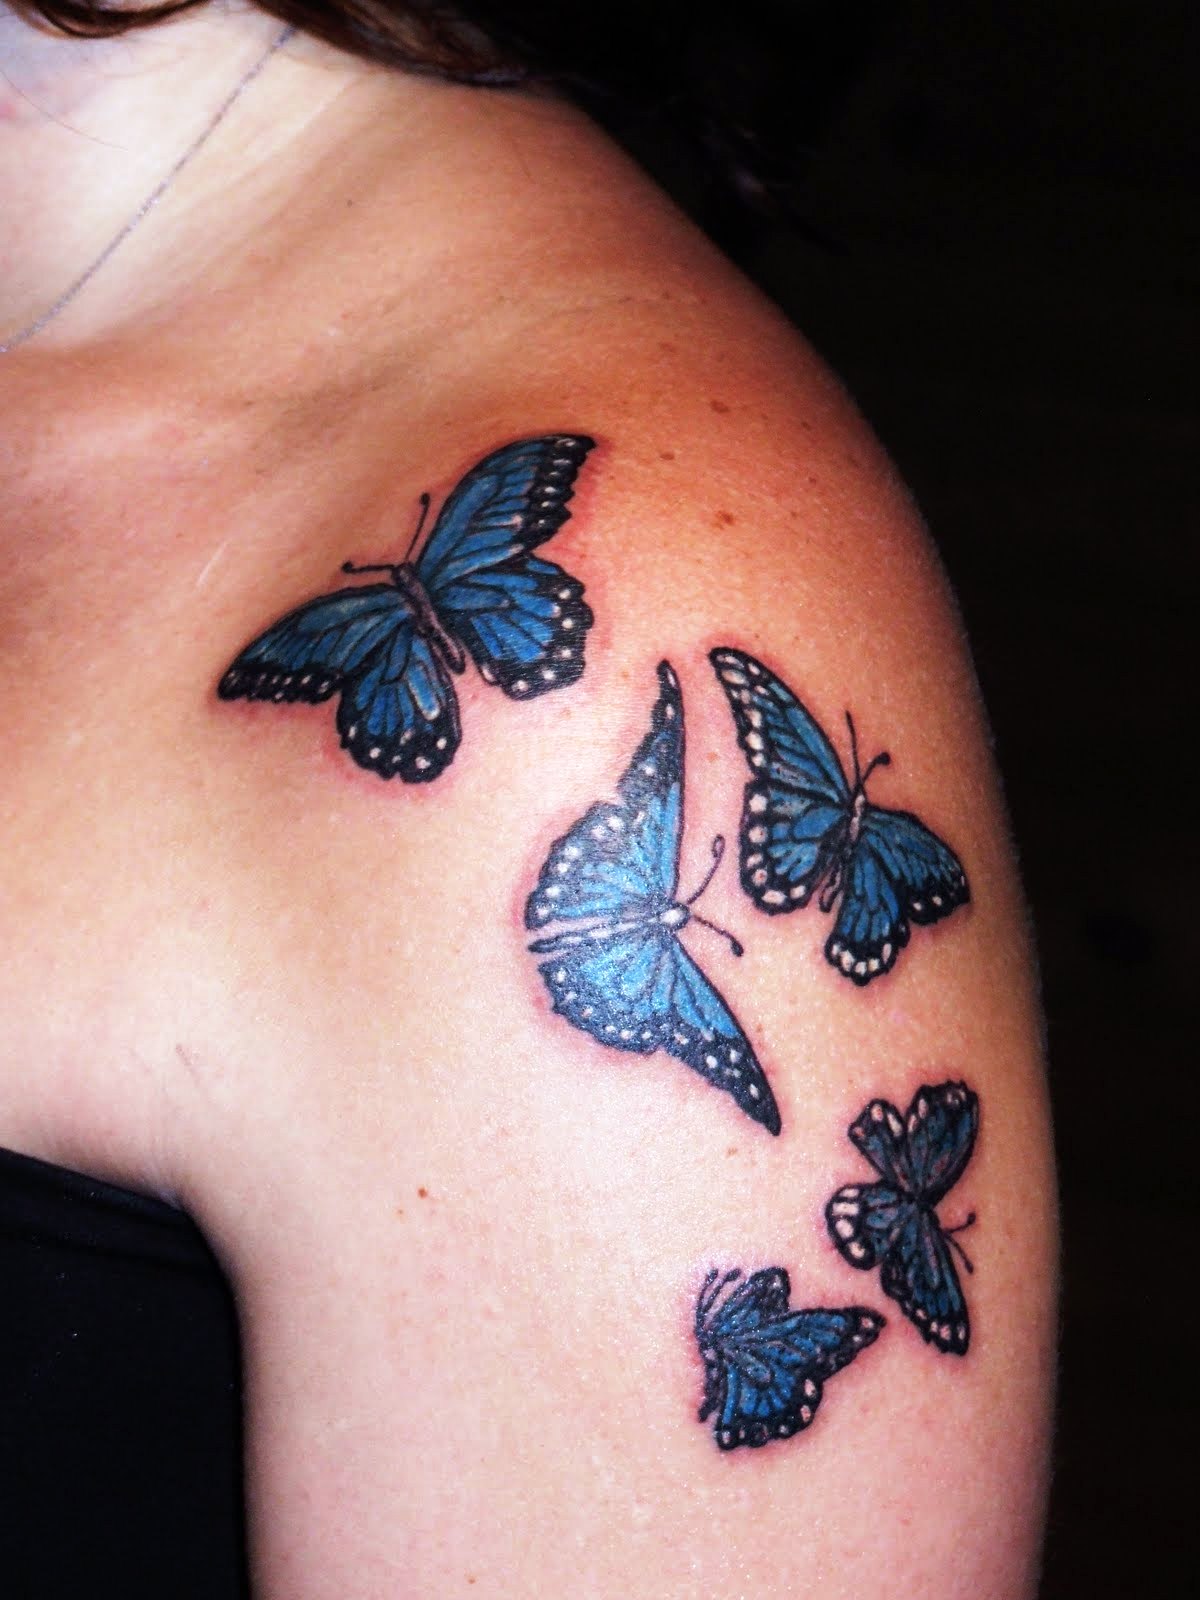 25 Butterfly Tattoos Ideas For Women To Try  Flawssy